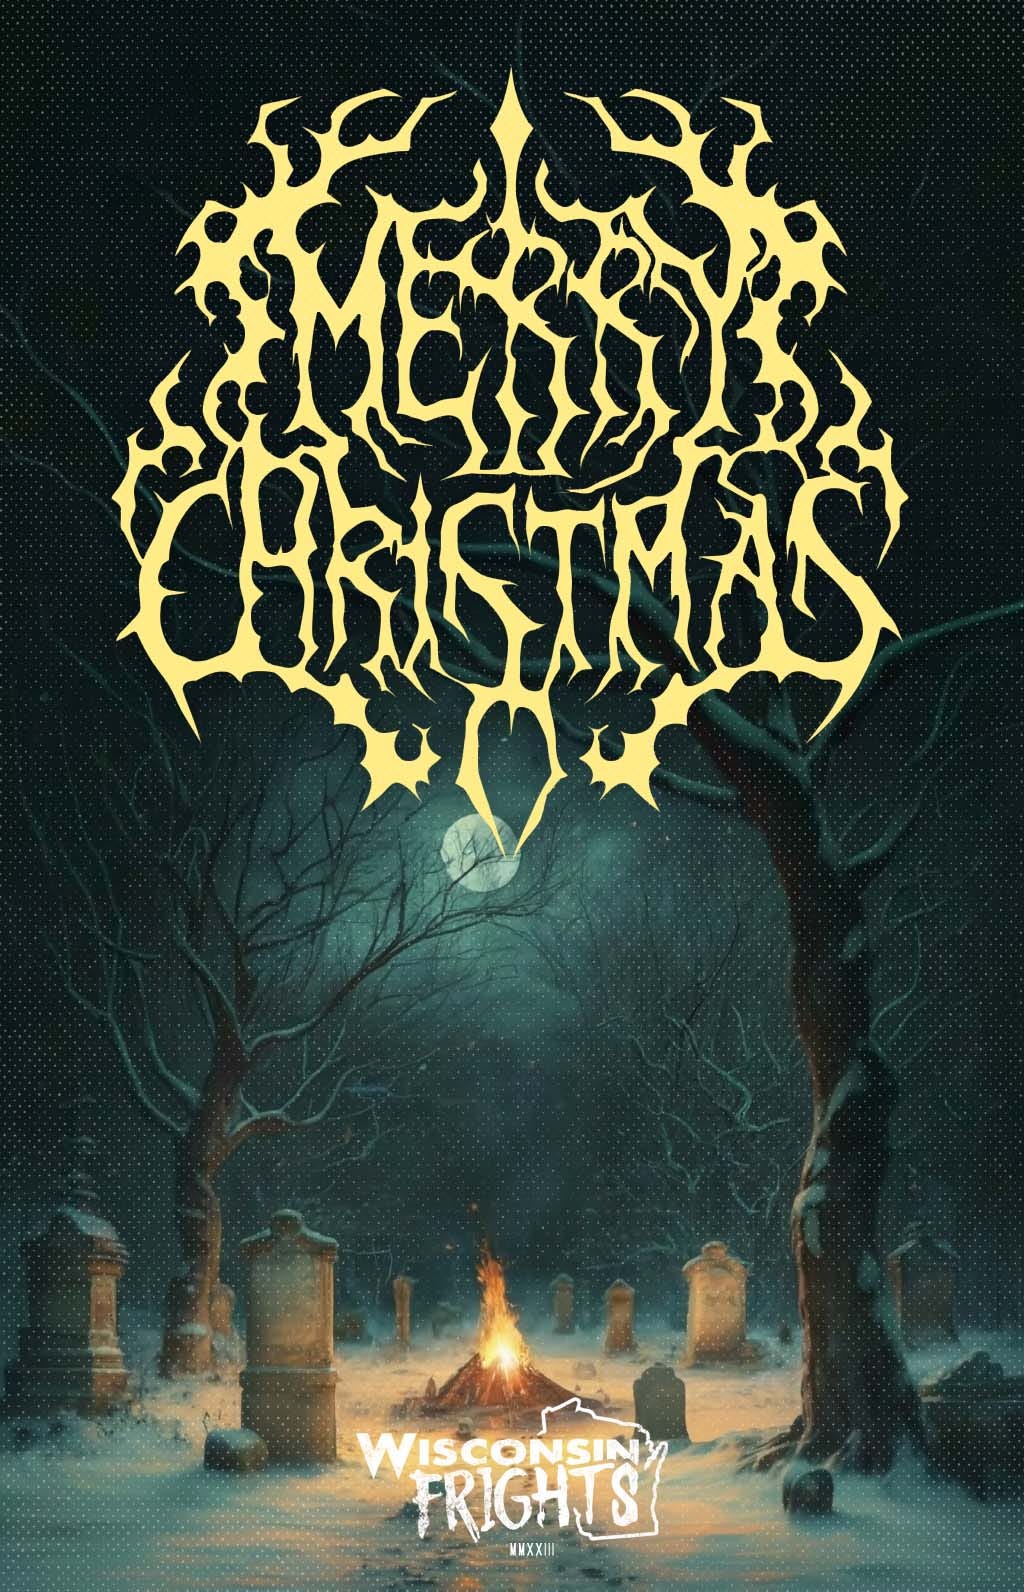 Merry Christmas from Wisconsin Frights